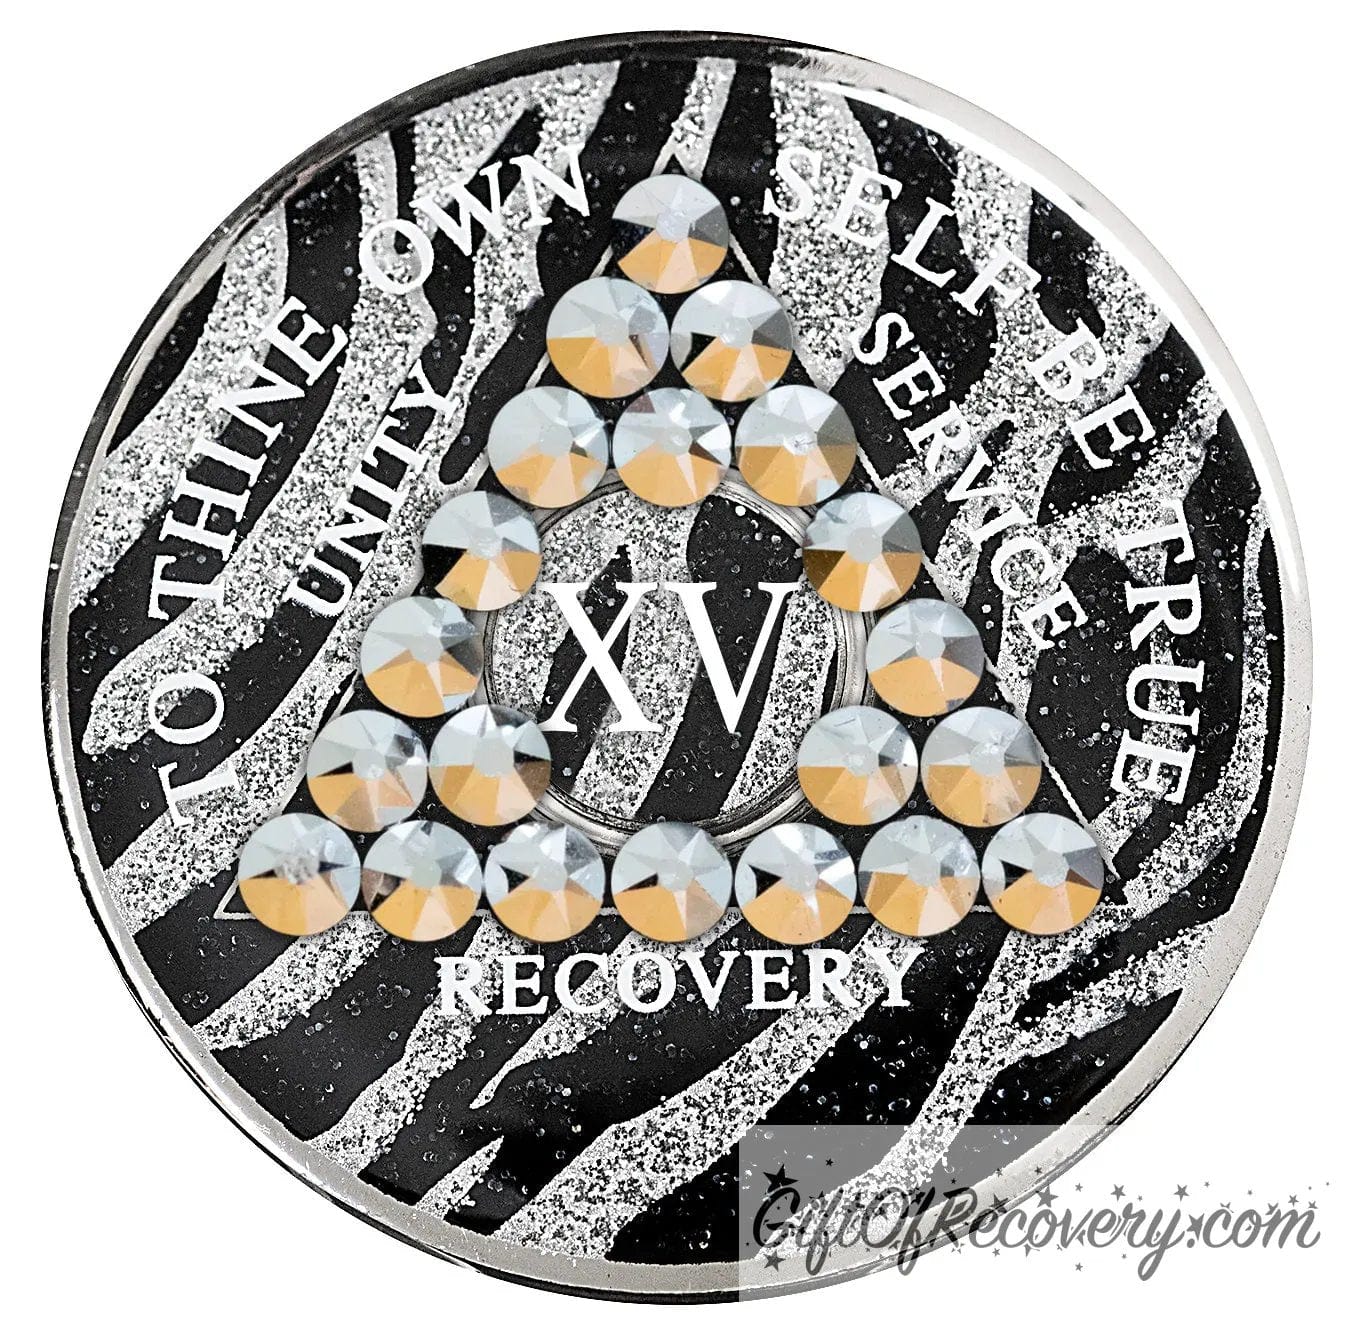 15 Year zebra glitter print, black and silver, AA medallion with 21 genuine comet crystals in a triangle around the year, the lettering unity, service, recovery, the 1 year and To Thine Own Self Be True are in white and the recovery medallion rim is silver.